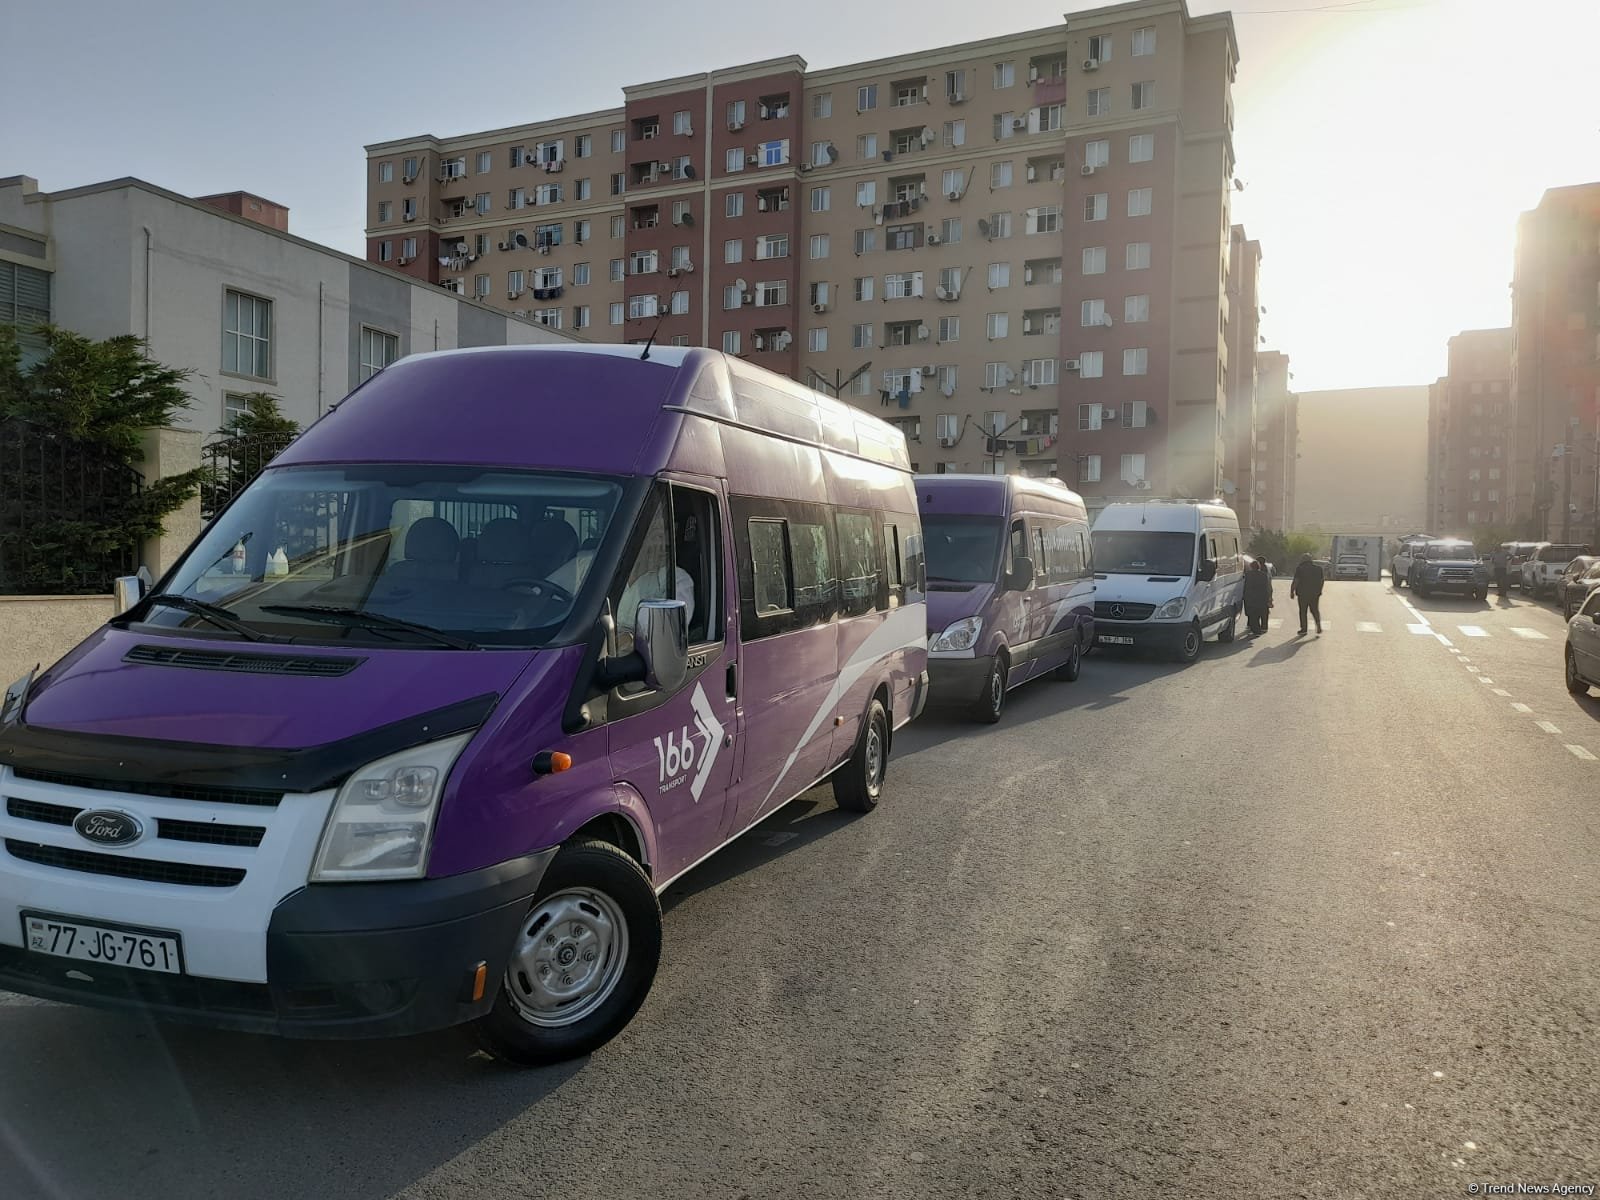 Another group of former IDPs arrives in Azerbaijan's Lachin